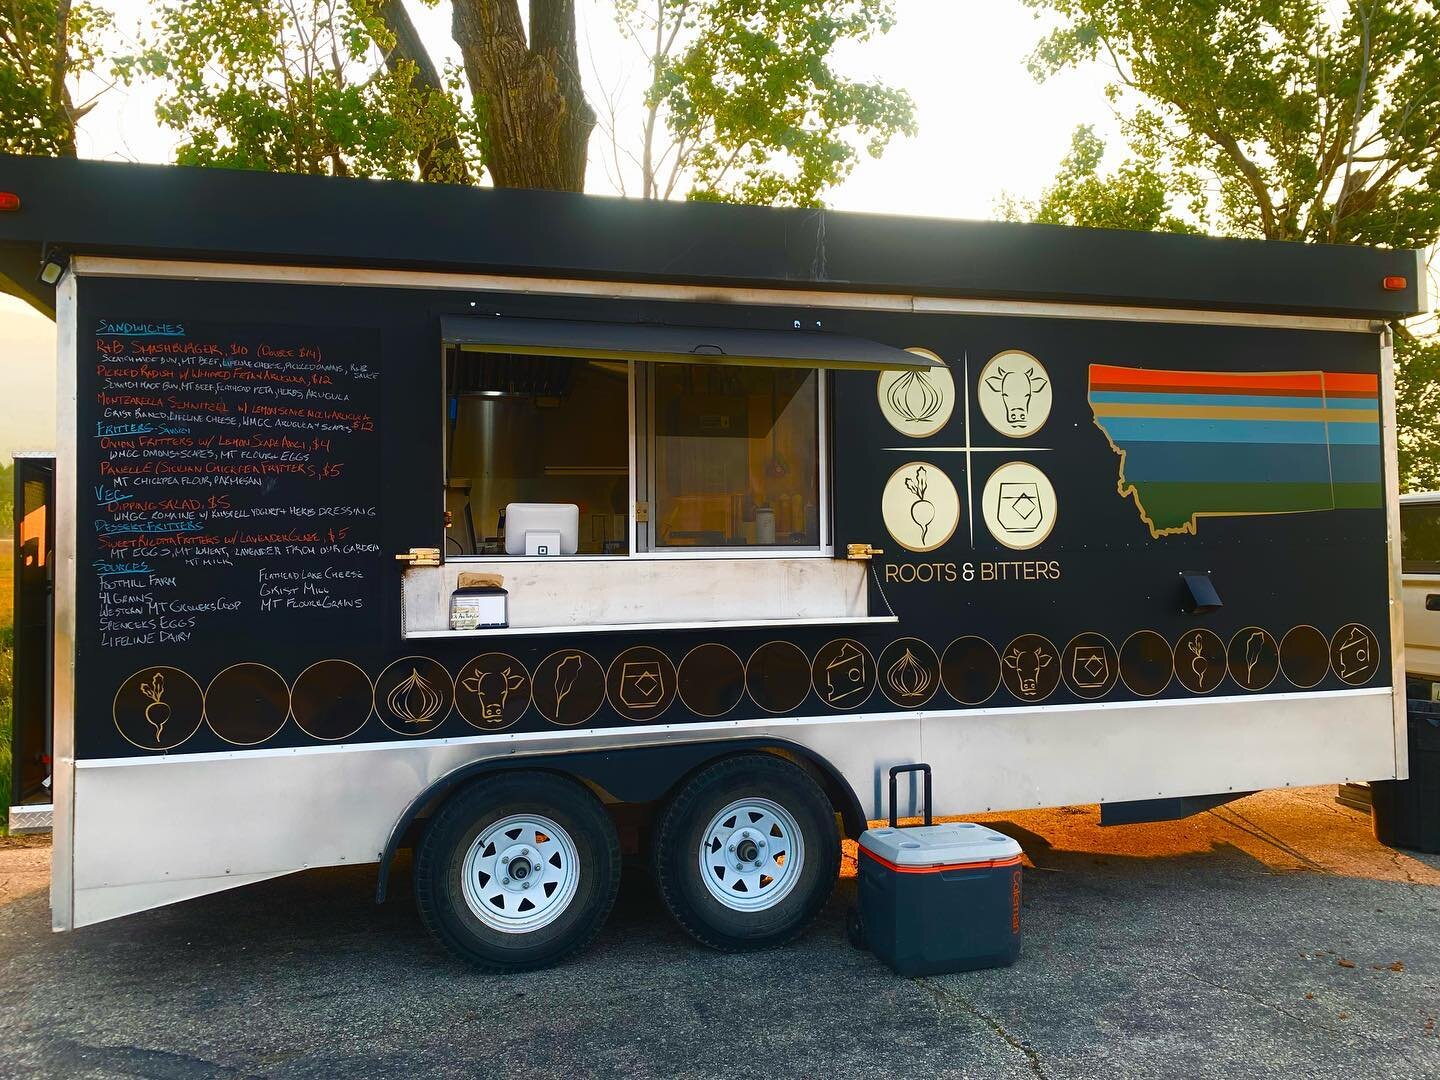 Thank you to everyone who came out to support us on our first night of 2023! We&rsquo;re so excited for the season! #montanafoodtruck #localfoodlove #montanabeef #madeinmontana #florencemontana @foothill_farm @westernmontanagrowerscoop @gristmillinga